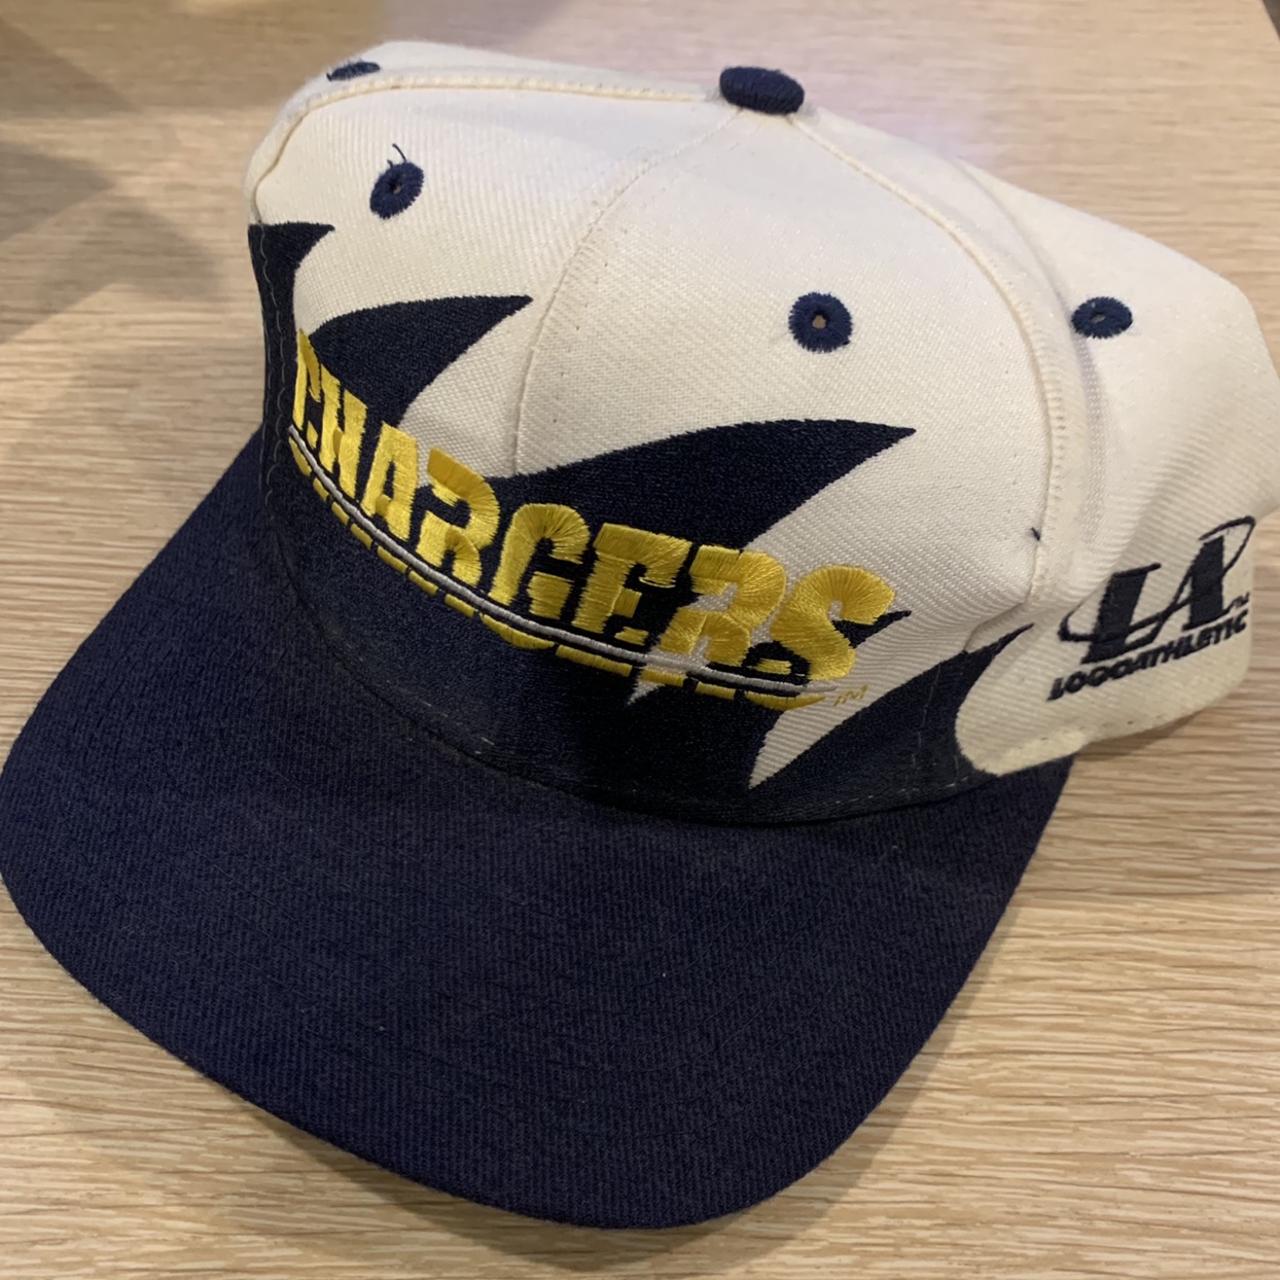 Men's White and Navy Hat